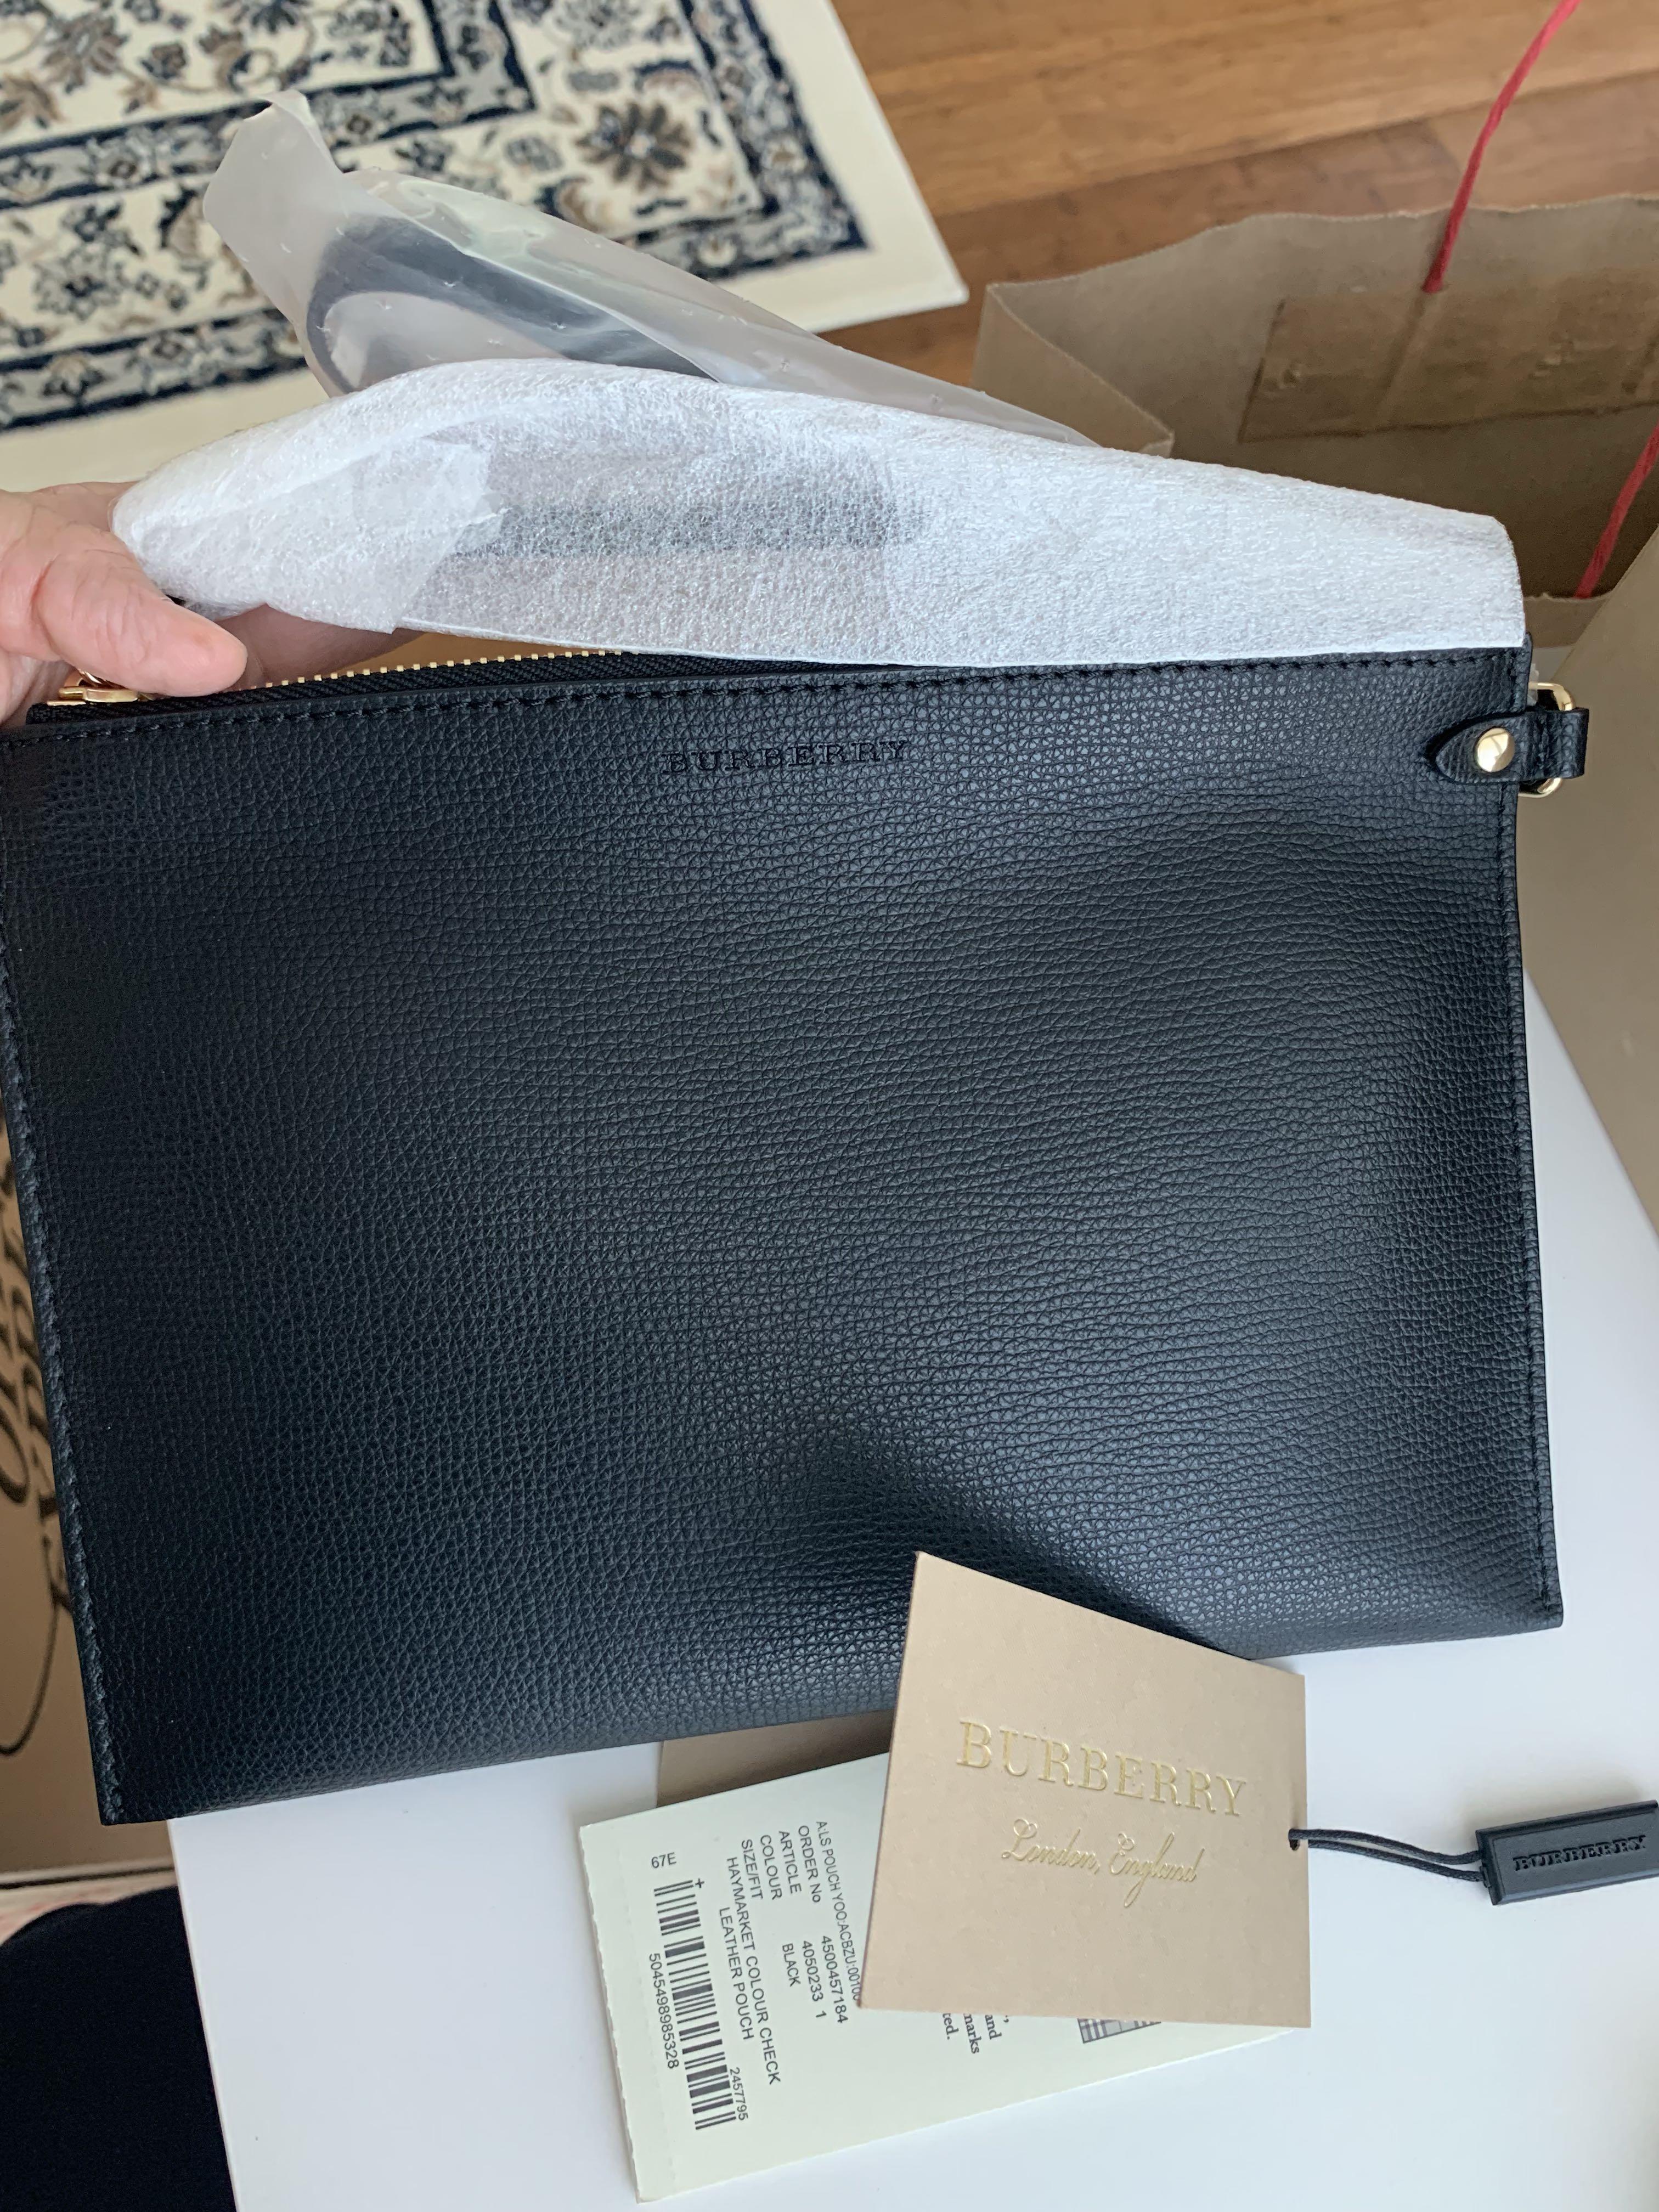 burberry leather pouch